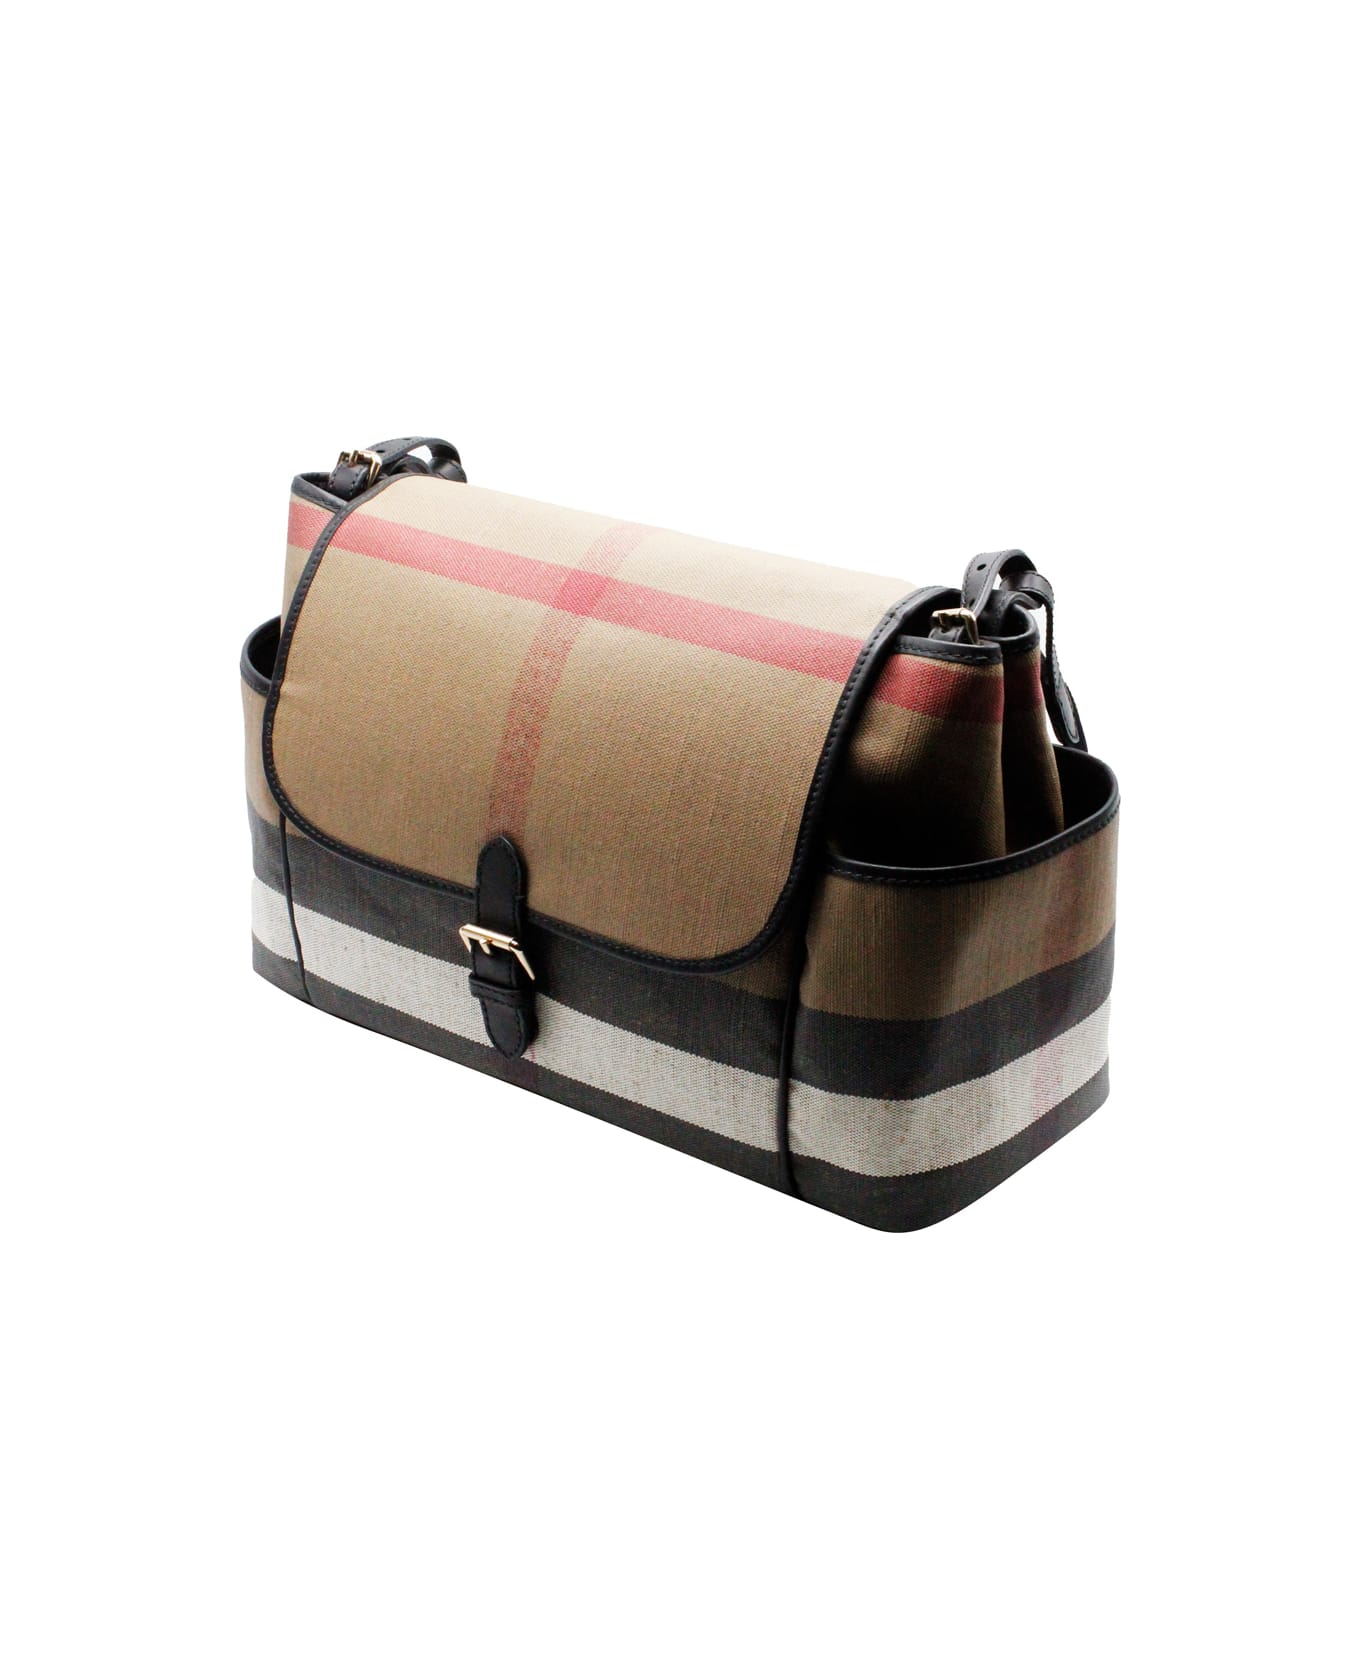 Burberry Mum Changing Bag Made Of Cotton Canvas With Check Pattern With Shoulder Strap, Comfortable Internal Pockets And Changing Mat. Measures Cm. 38x30x17 - Check